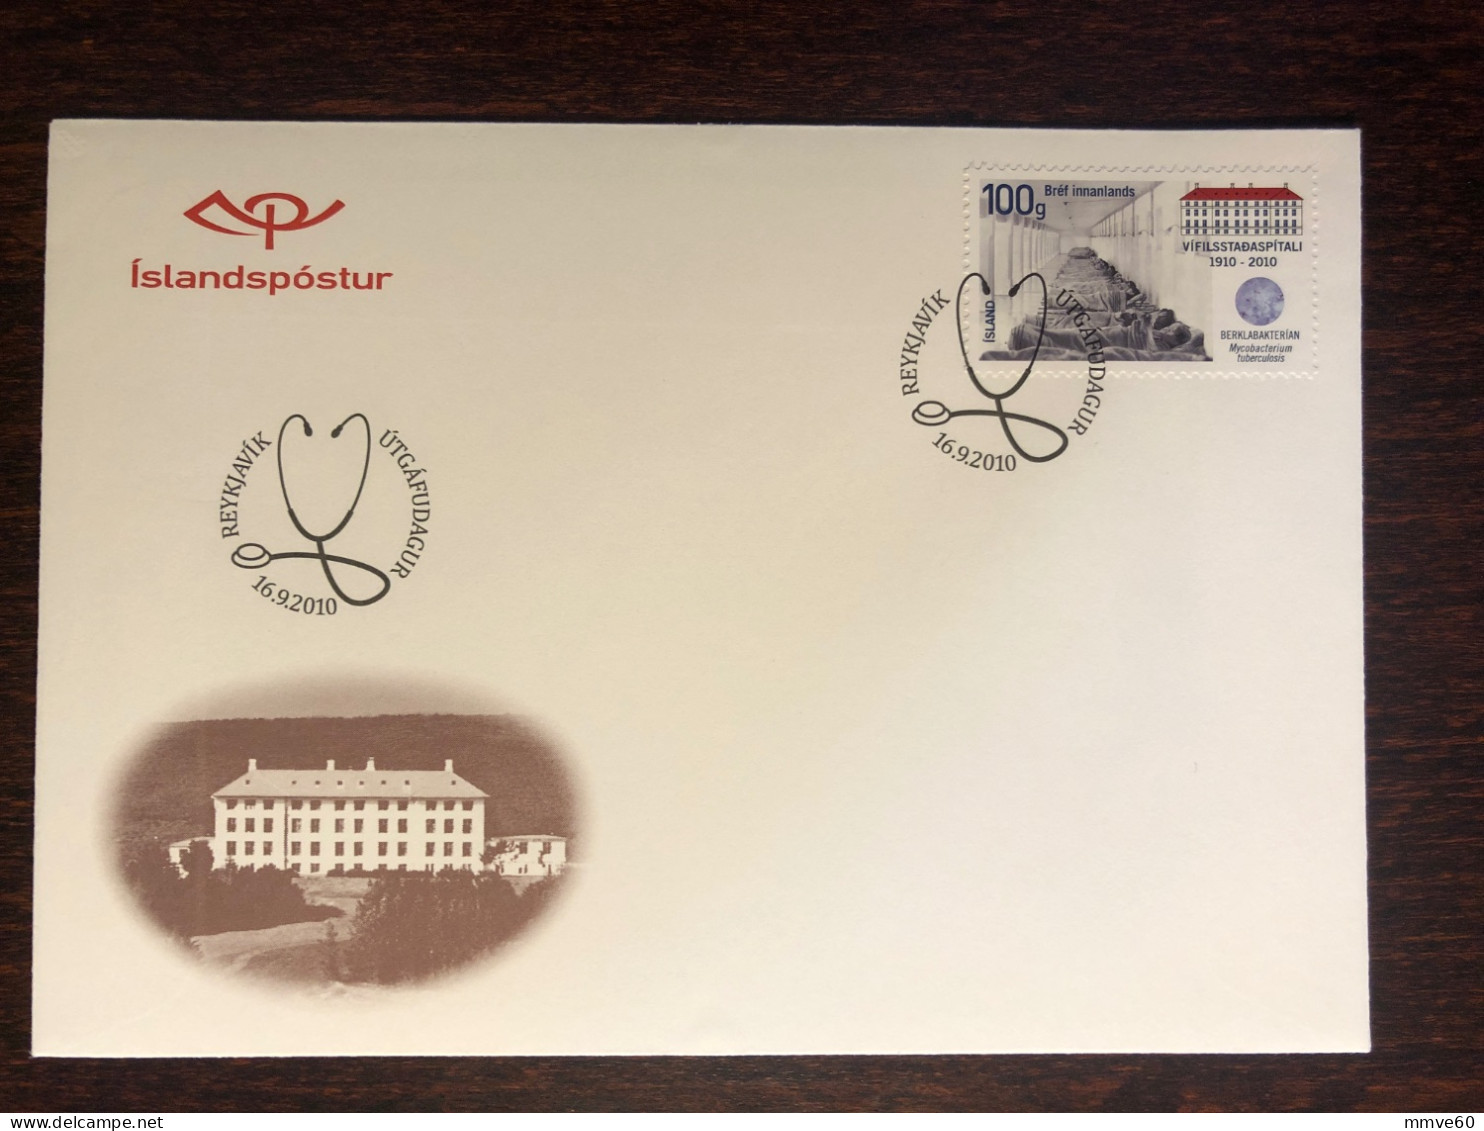 ICELAND FDC COVER 2010 YEAR PSYCHIATRY HOSPITAL SANATORIUM HEALTH MEDICINE STAMPS - FDC